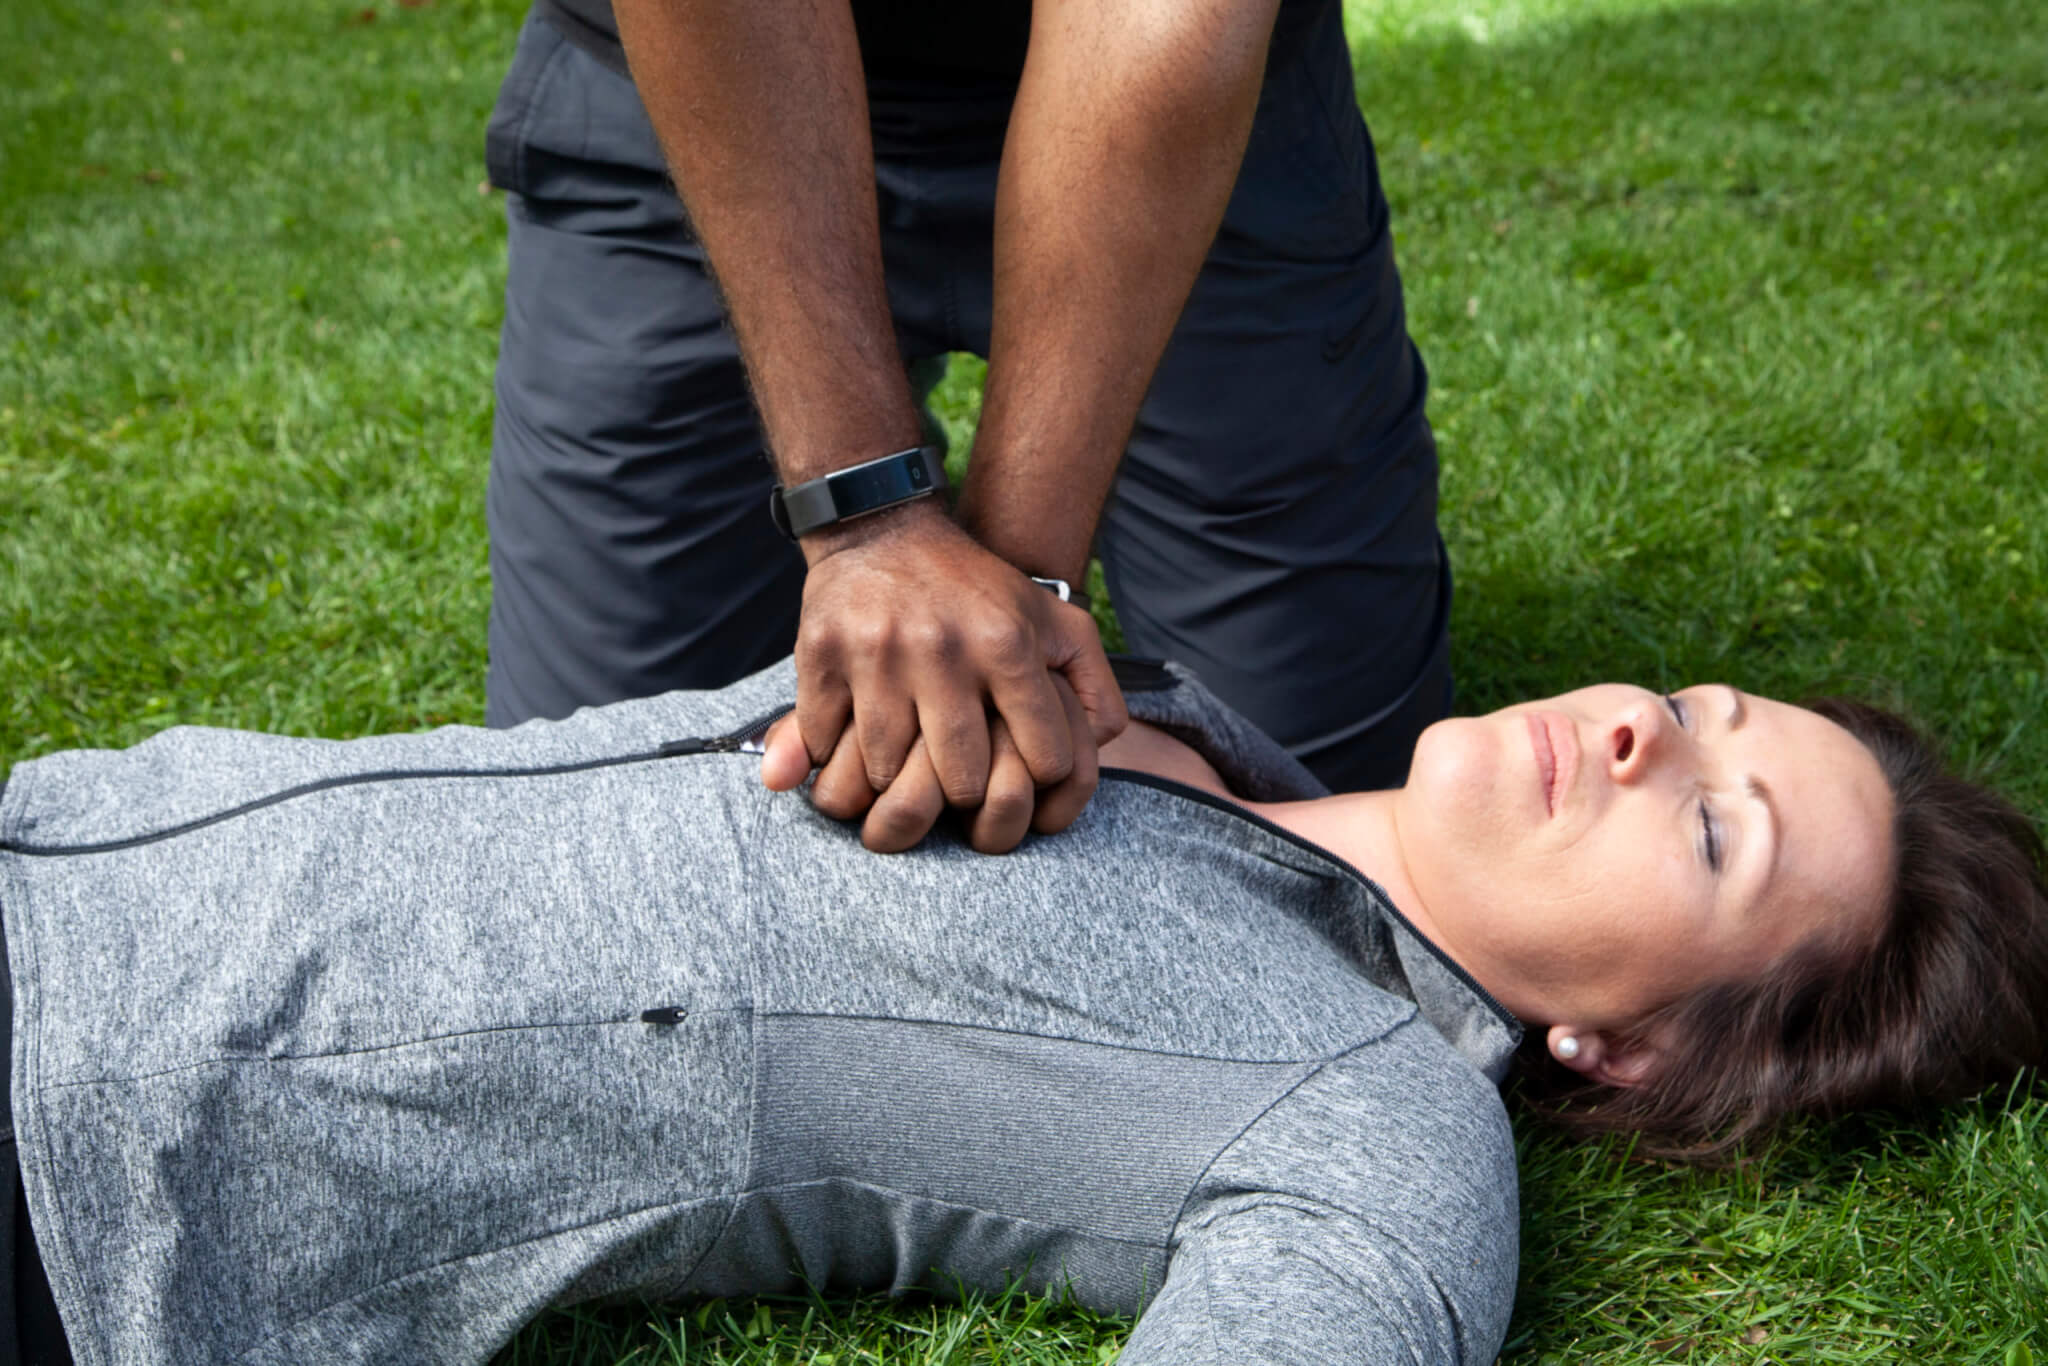 A man preforms CPR on an unconscious woman